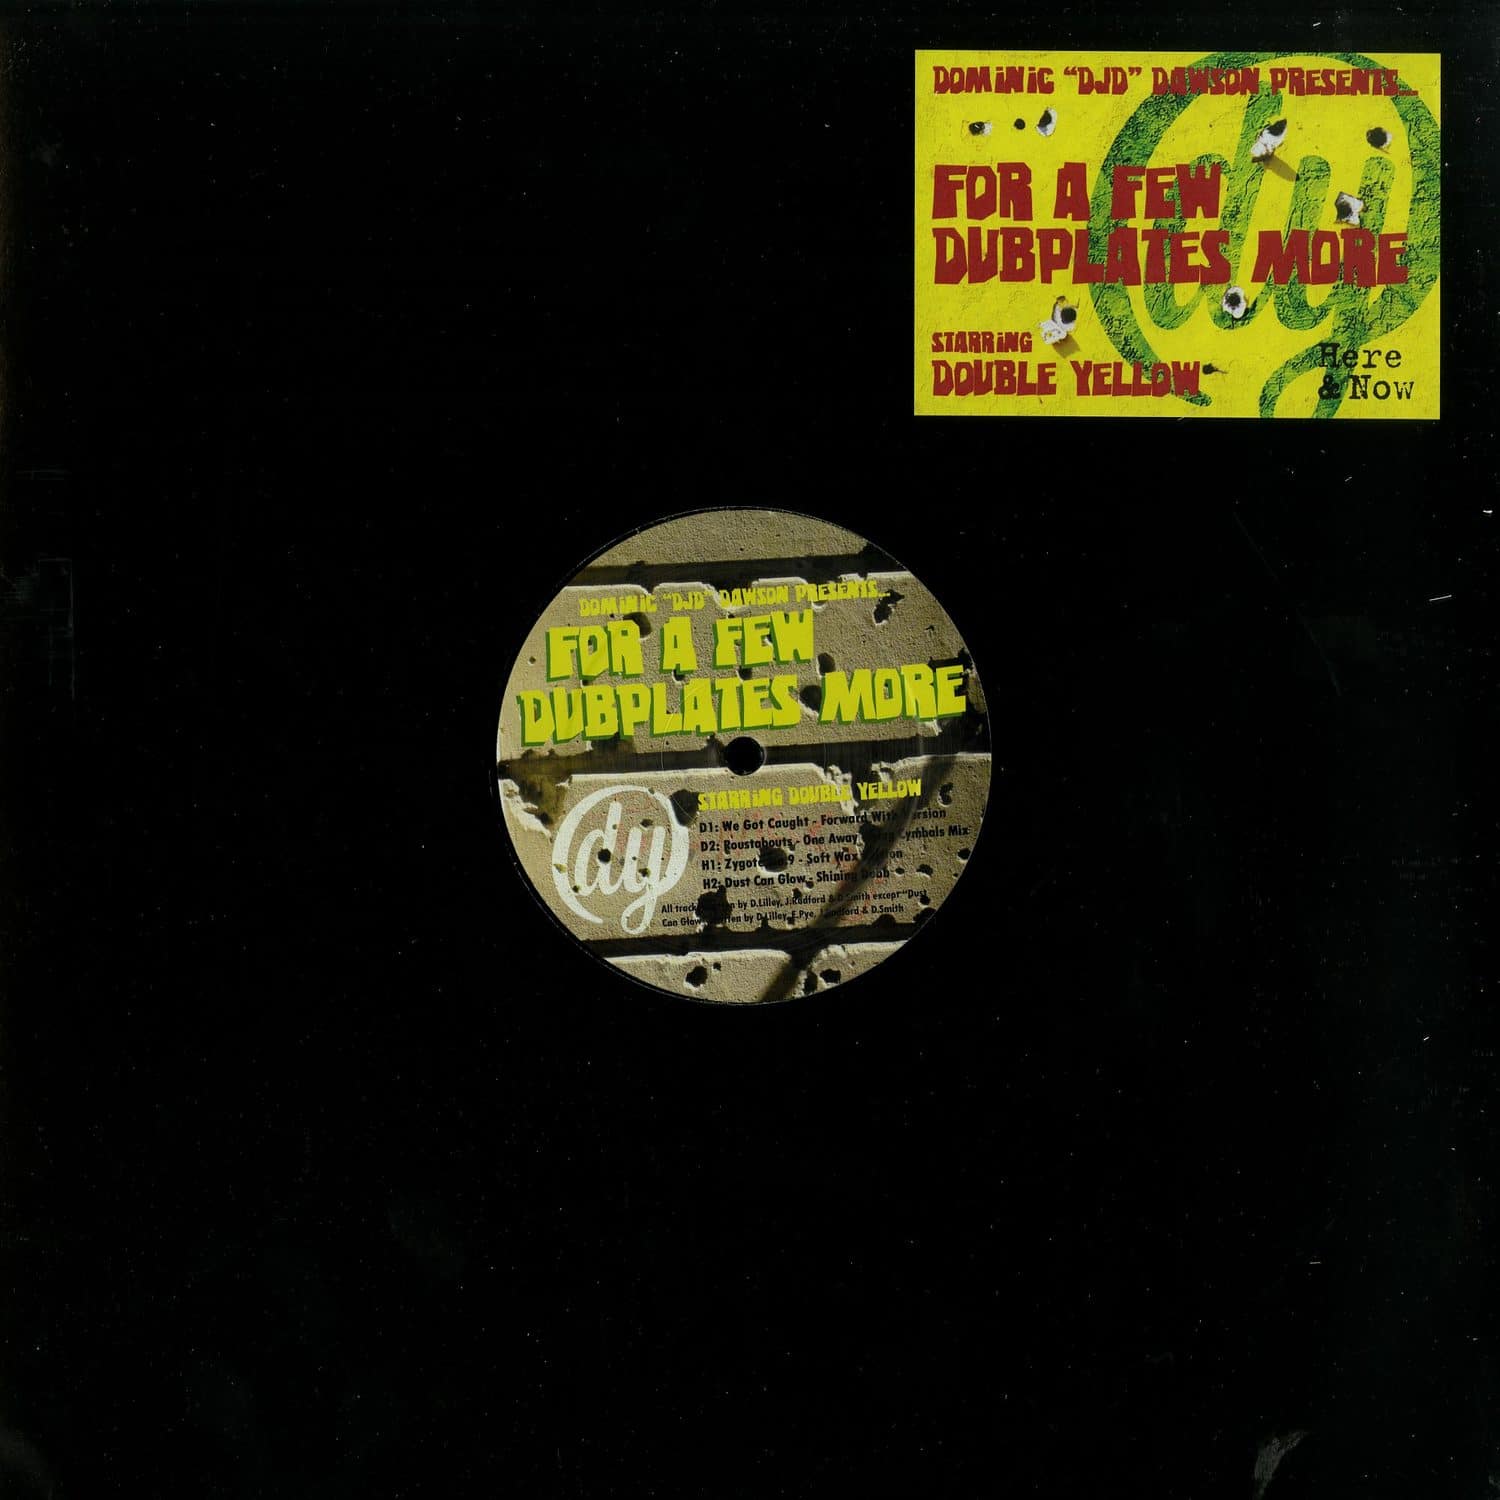 Dominic DJD Dawson pres. Double Yellow - FOR A FEW DUBPLATES MORE